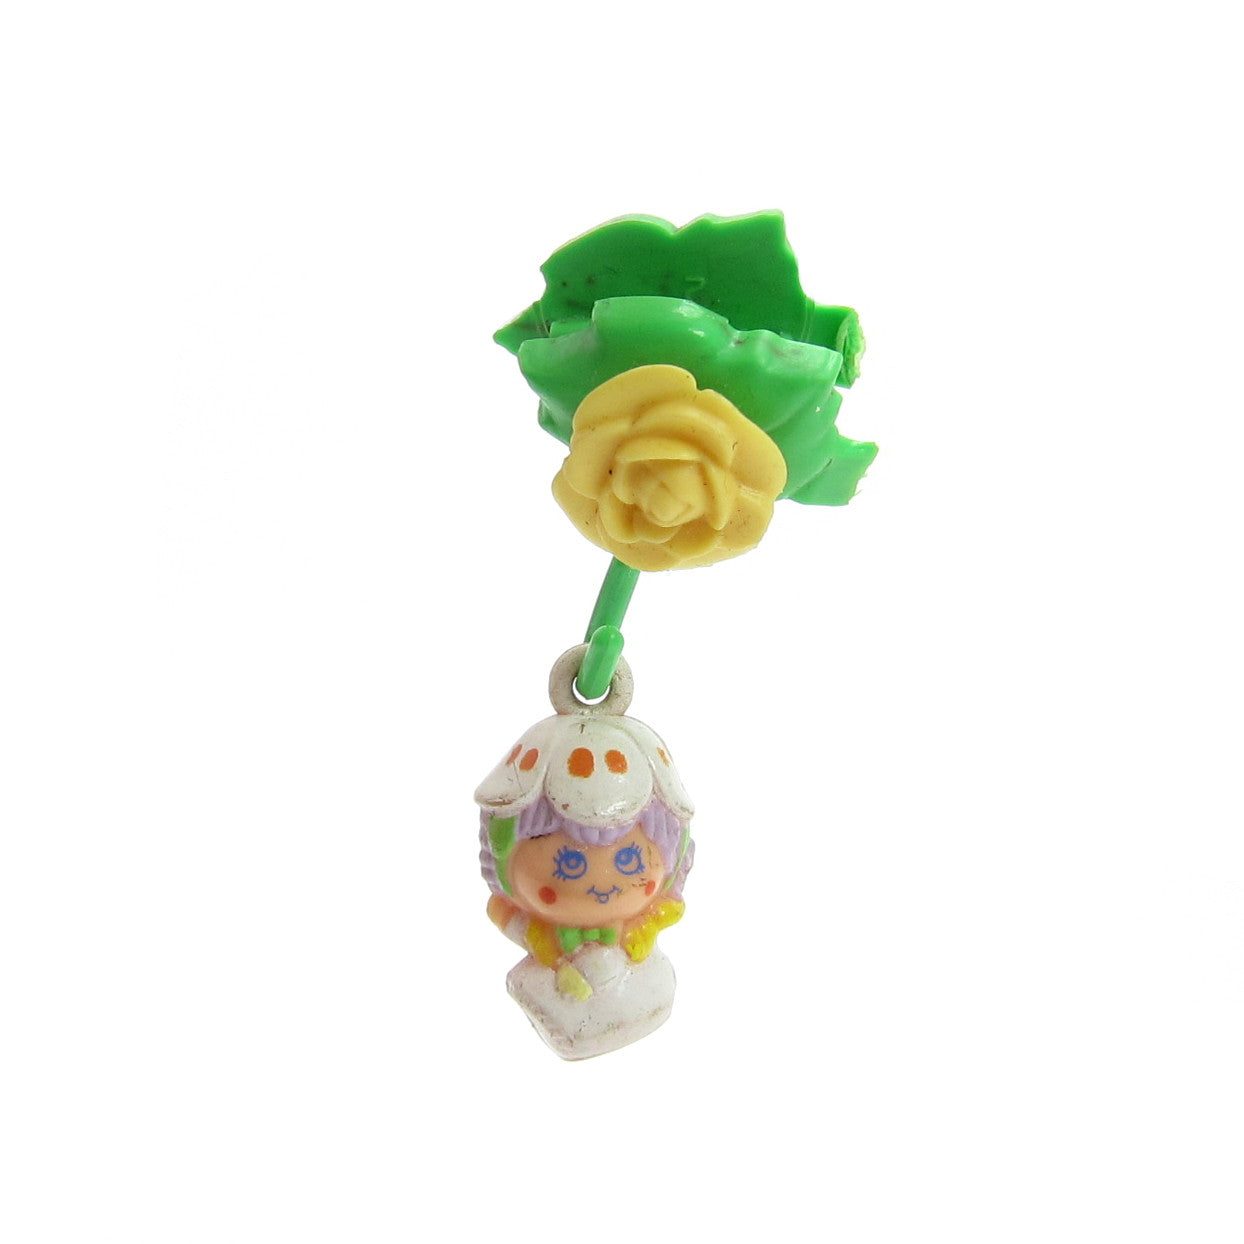 Charmkins Twinkle hair clip with yellow rose barrette